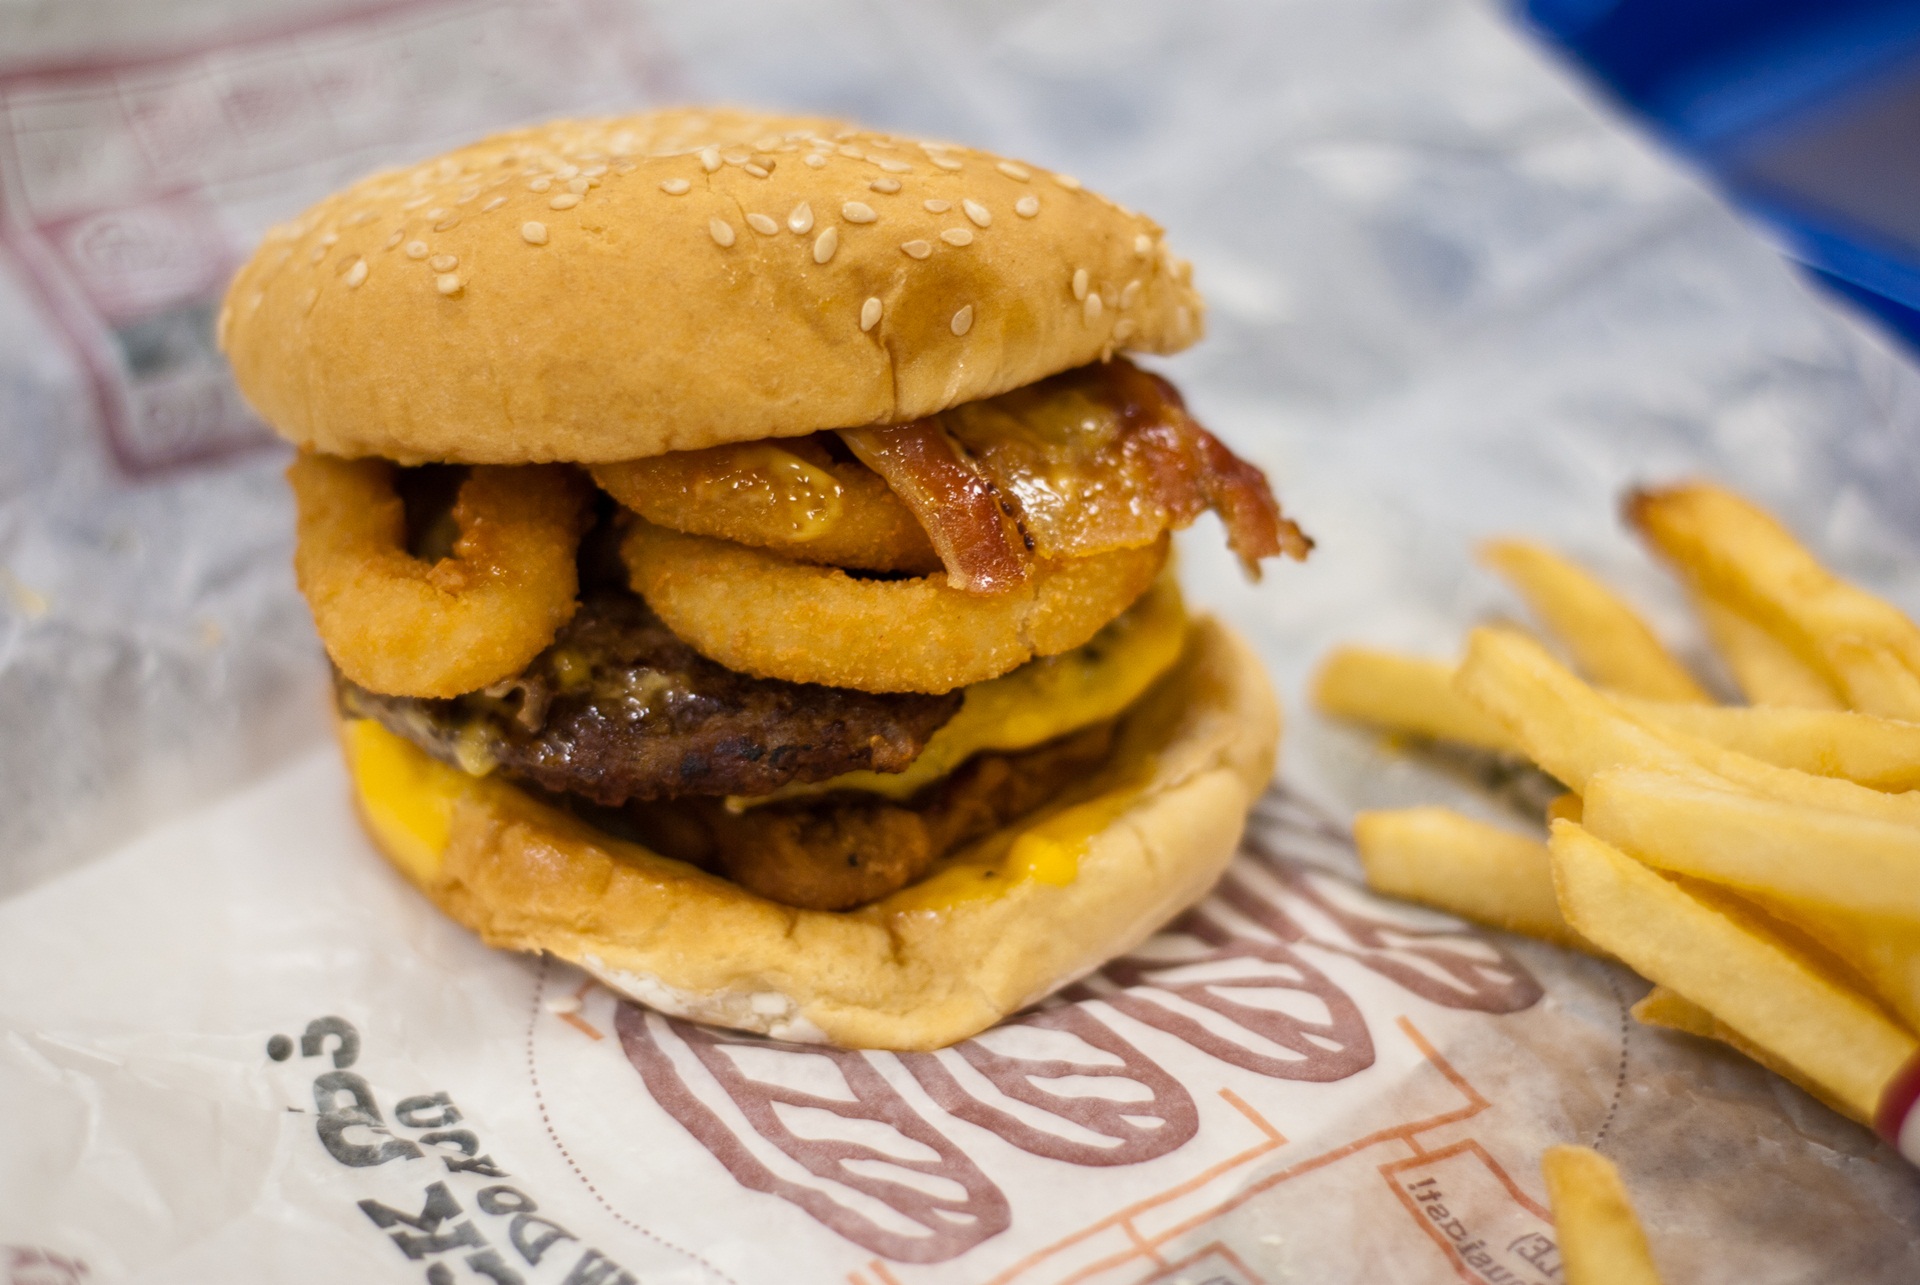 I noticed a trend in fast food restaurants nowadays - they just keep adding crap in the burger, then selling it for 2x it's regular price saying it's something new. So I figured I'd beat them to the punch this time; I ordered onion rings, nuggets, a bacon double stack and went to town. Oh, and I asked for a side of spicy mayo which I mixed with some ketchup and mayo, as the 'new special sauce'.